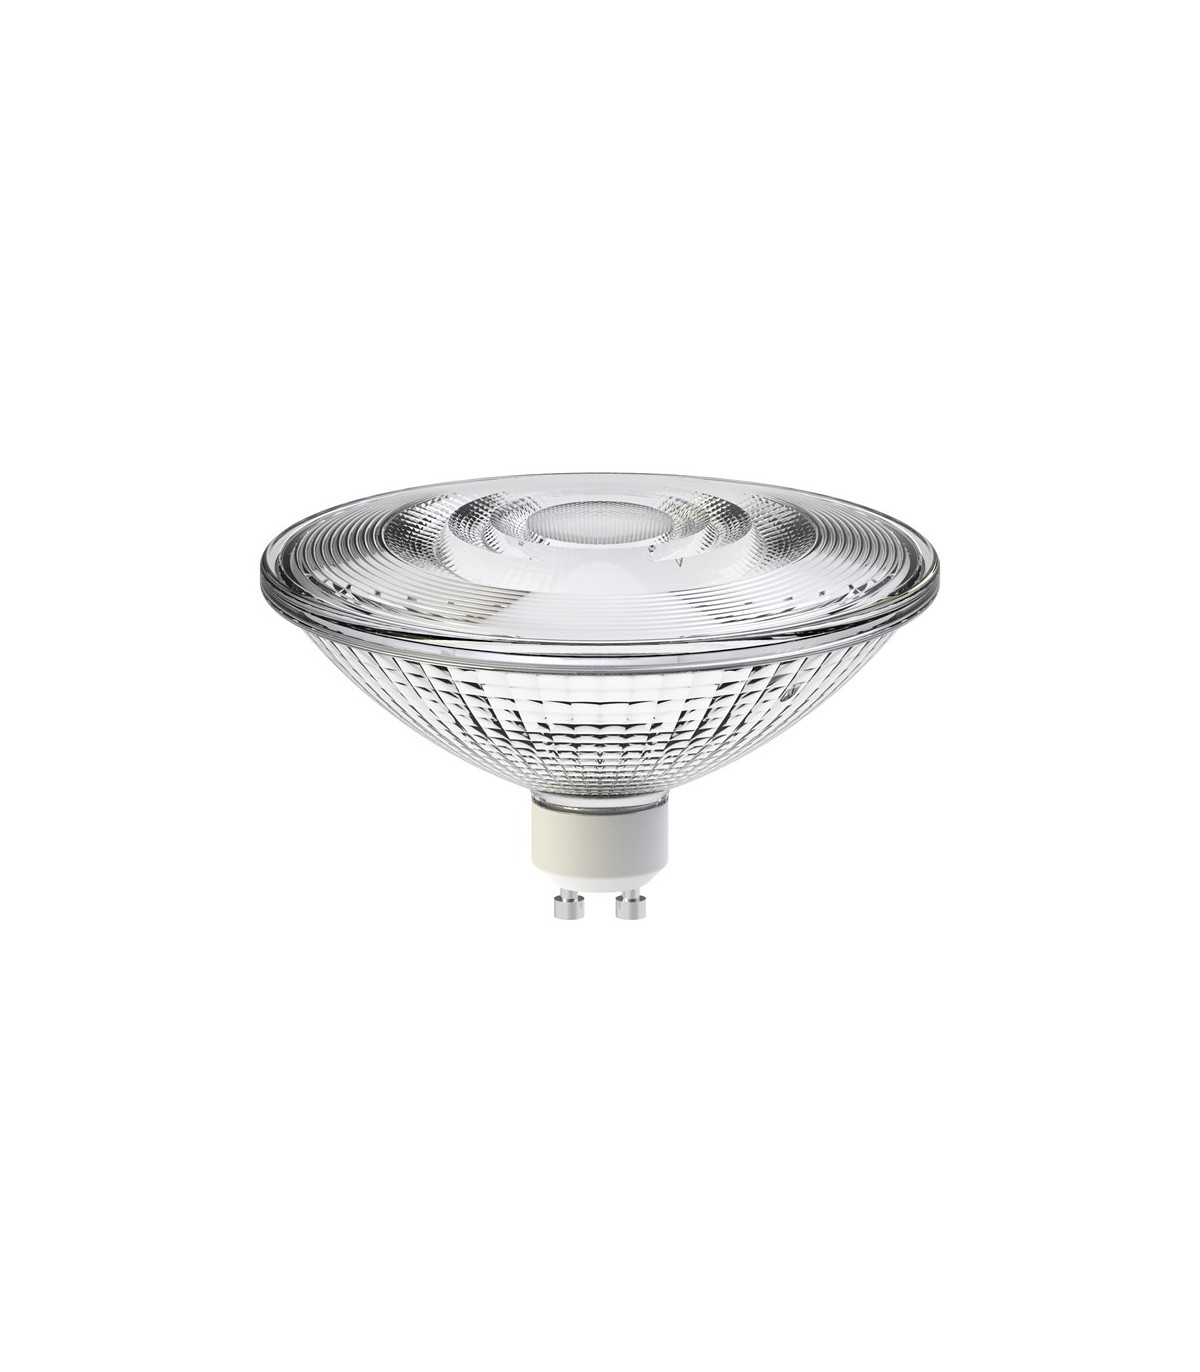 spot-gu10-philips-grand-angles-120-lumineux-remplace-50w-halogene